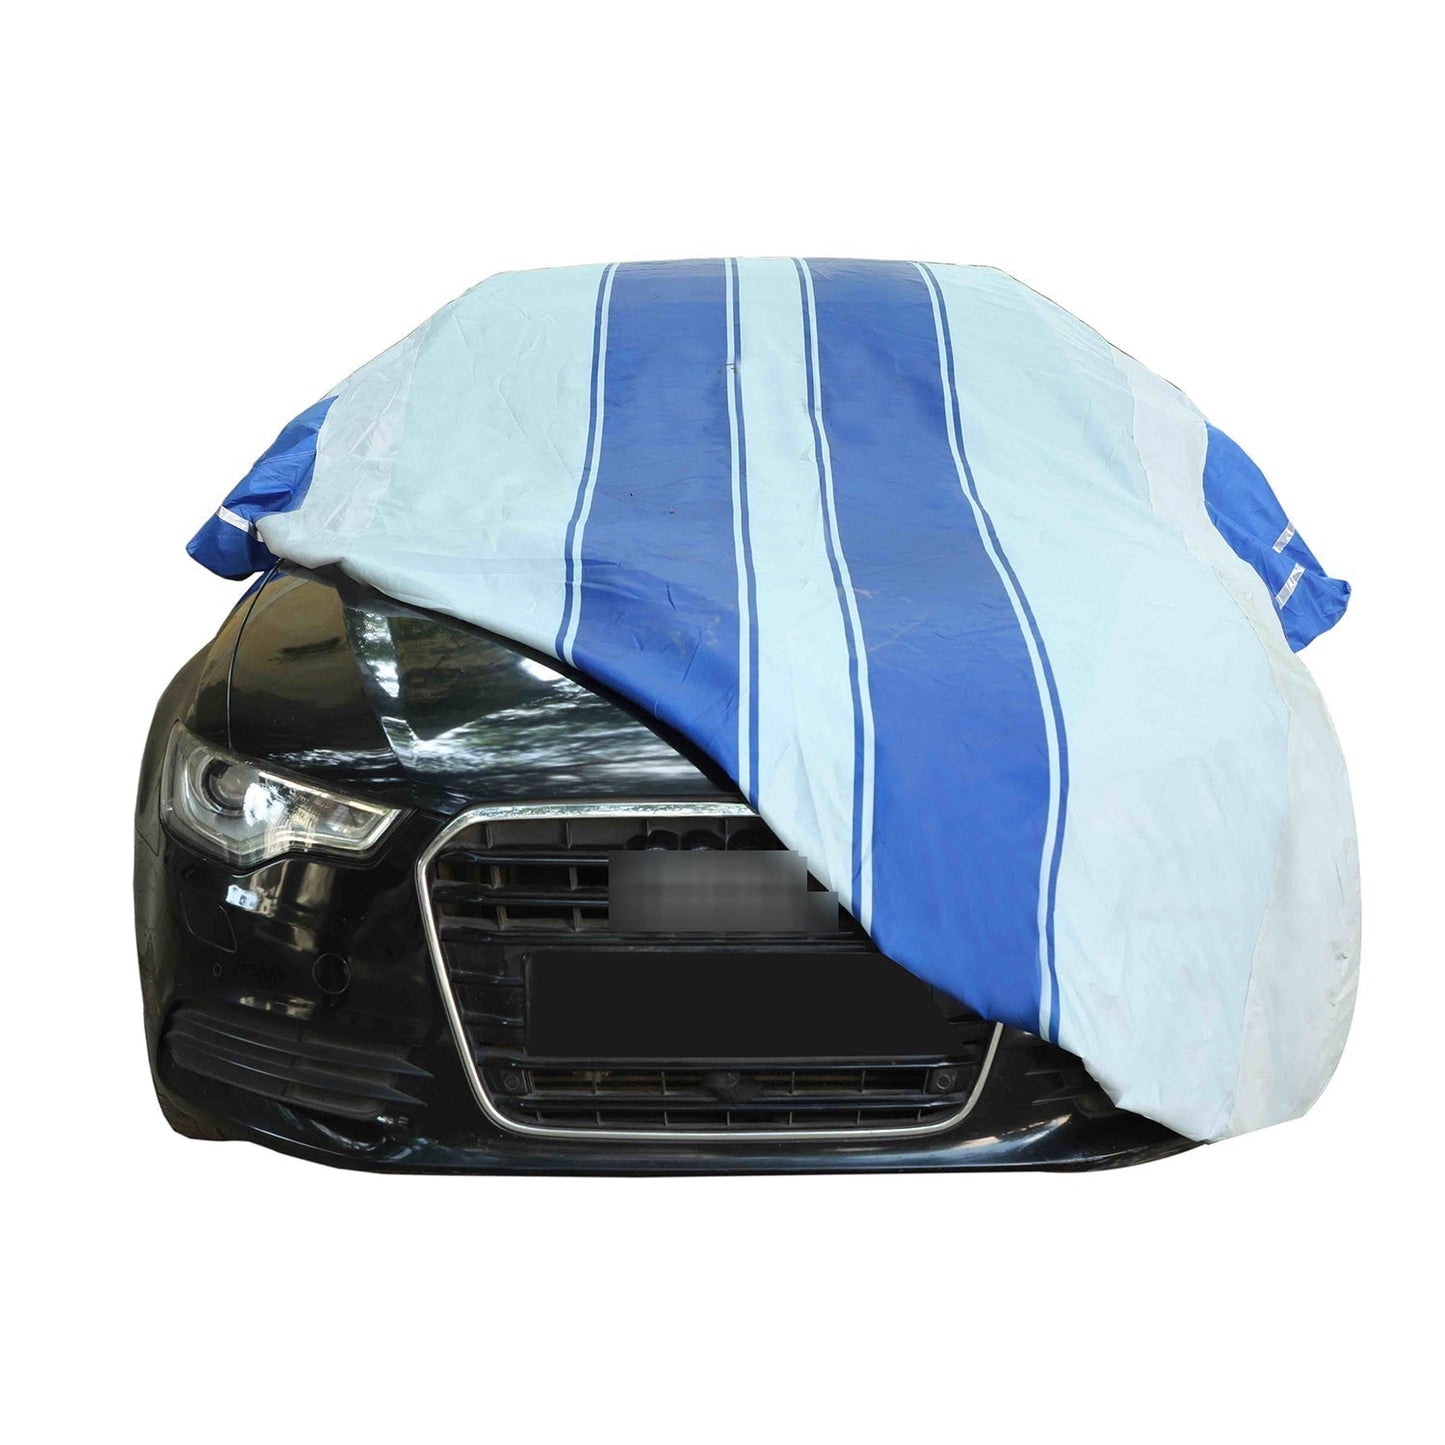 Oshotto 100% Blue dustproof and Water Resistant Car Body Cover with Mirror Pockets For Mitsubishi Outlander